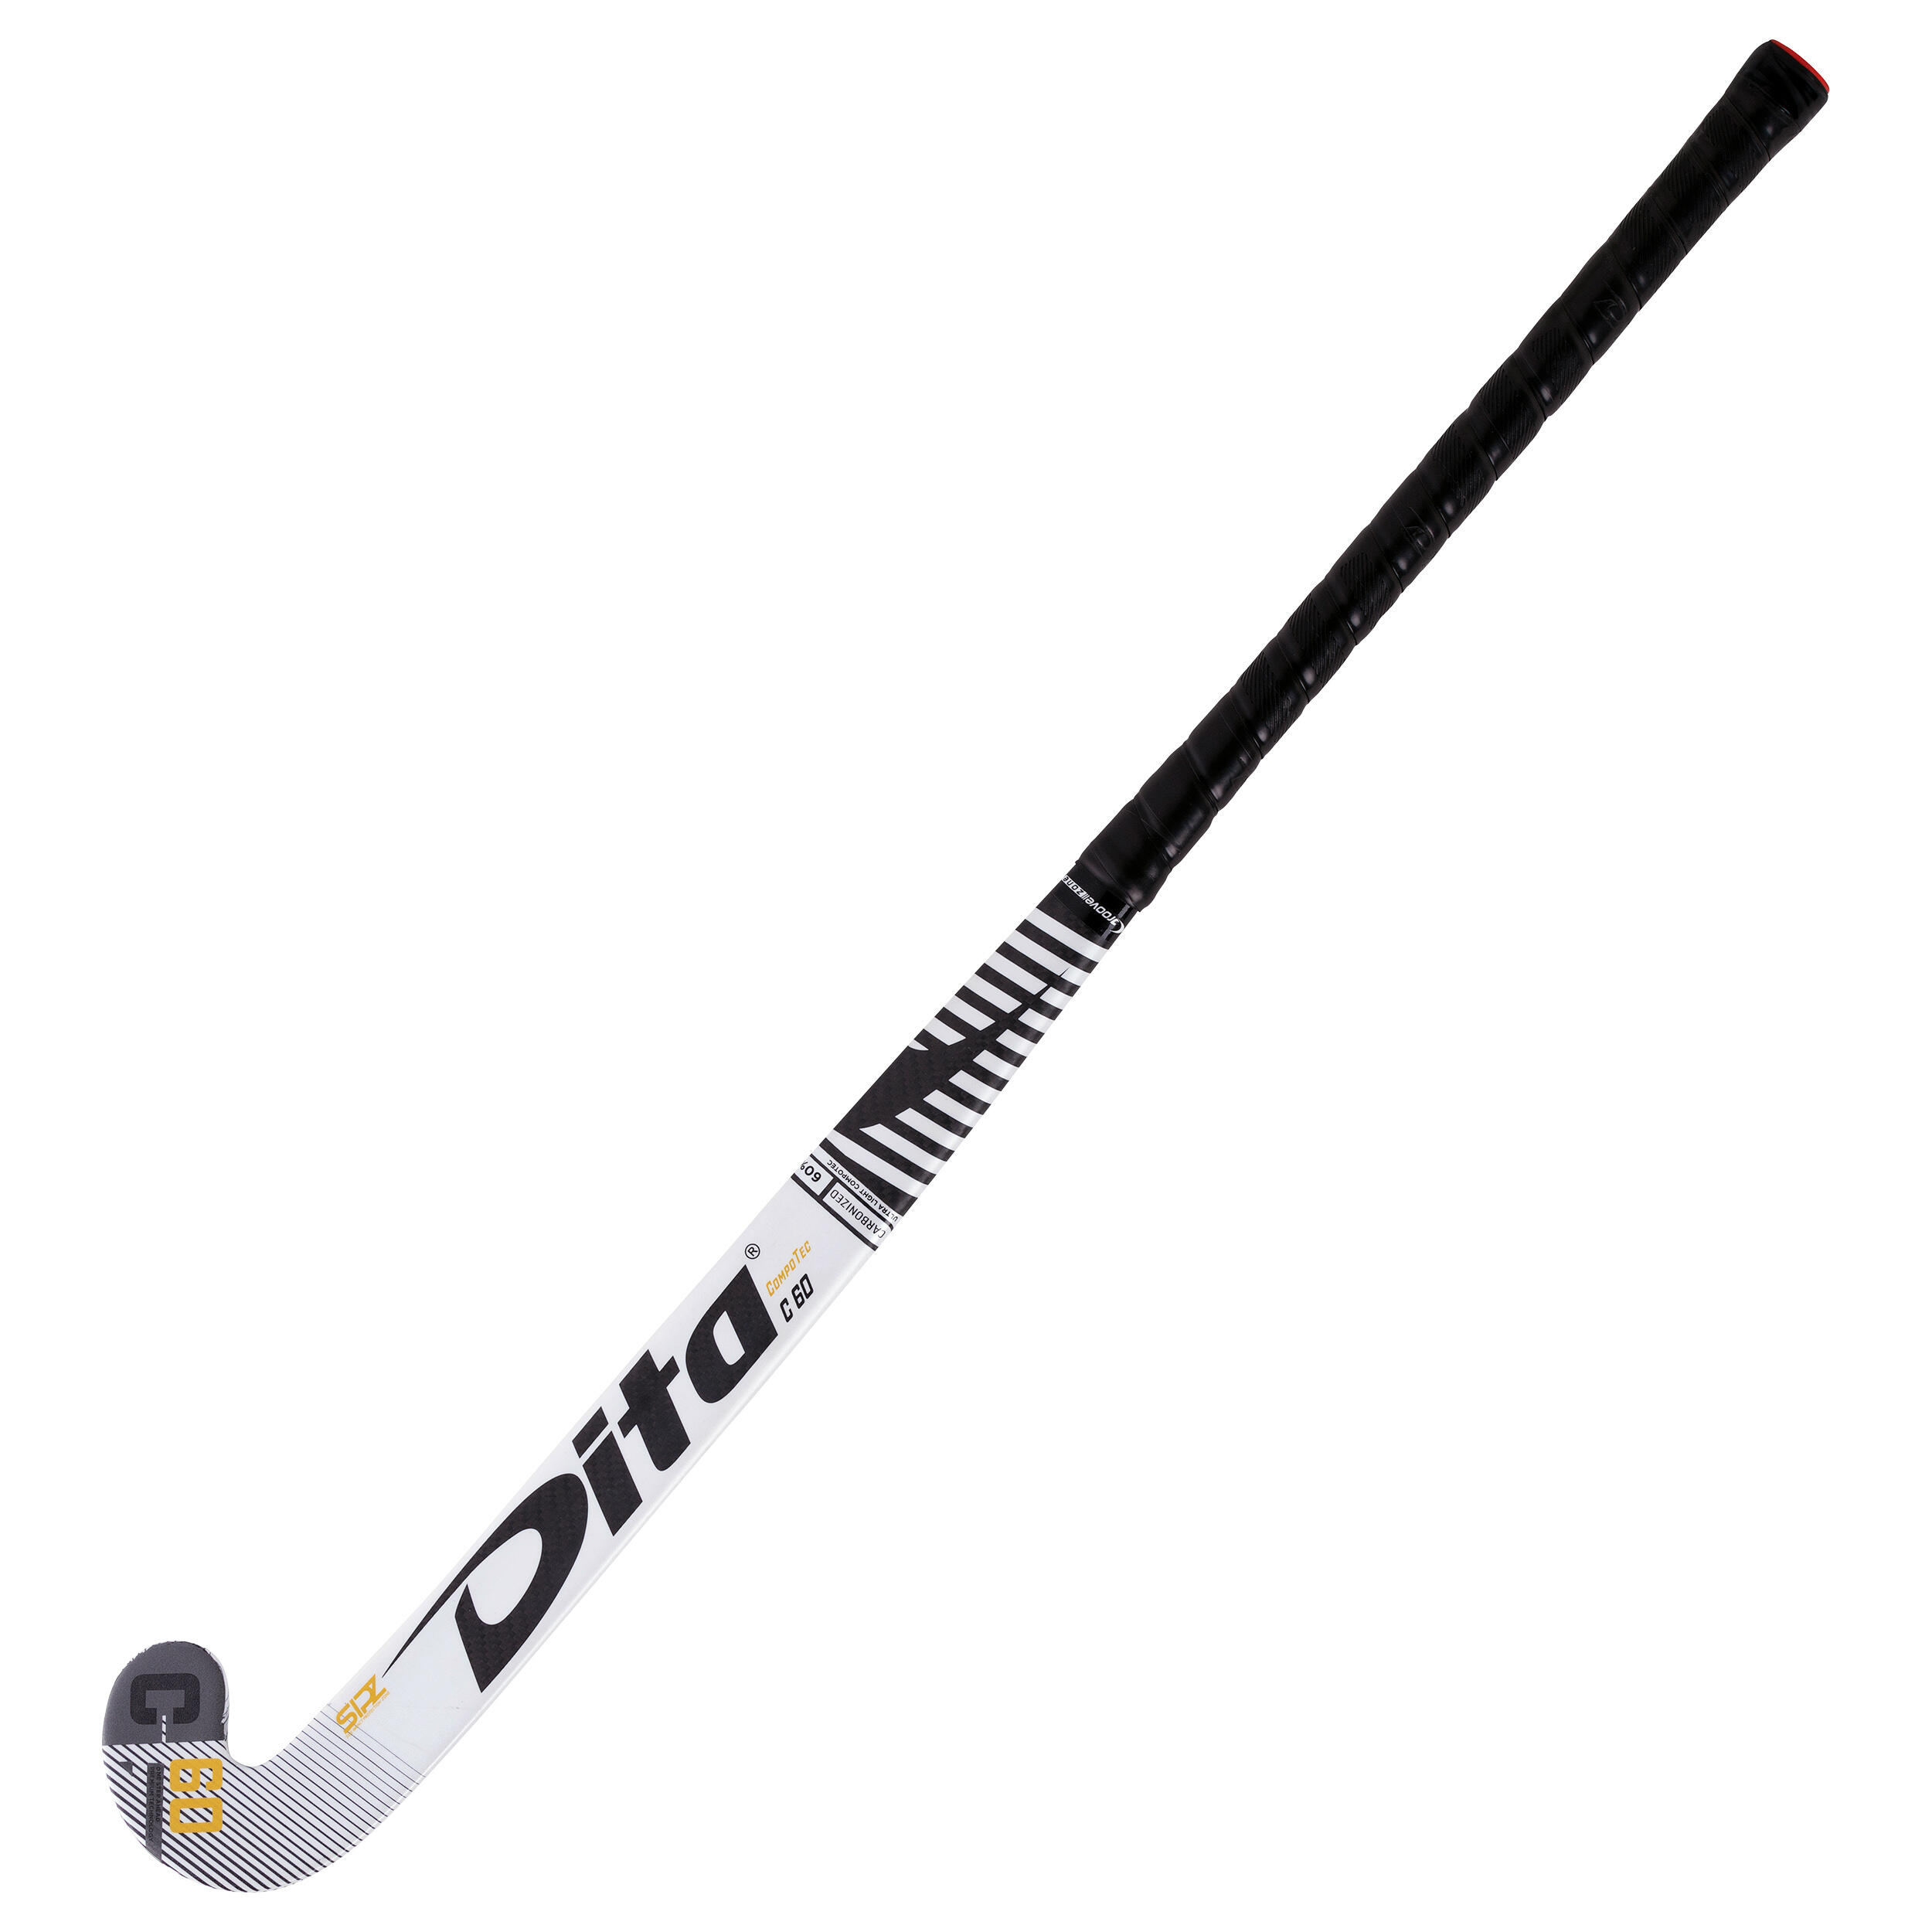 Adult Intermediate 60% Carbon Low Bow Field Hockey Stick CompotecC60 - White/Black 4/12